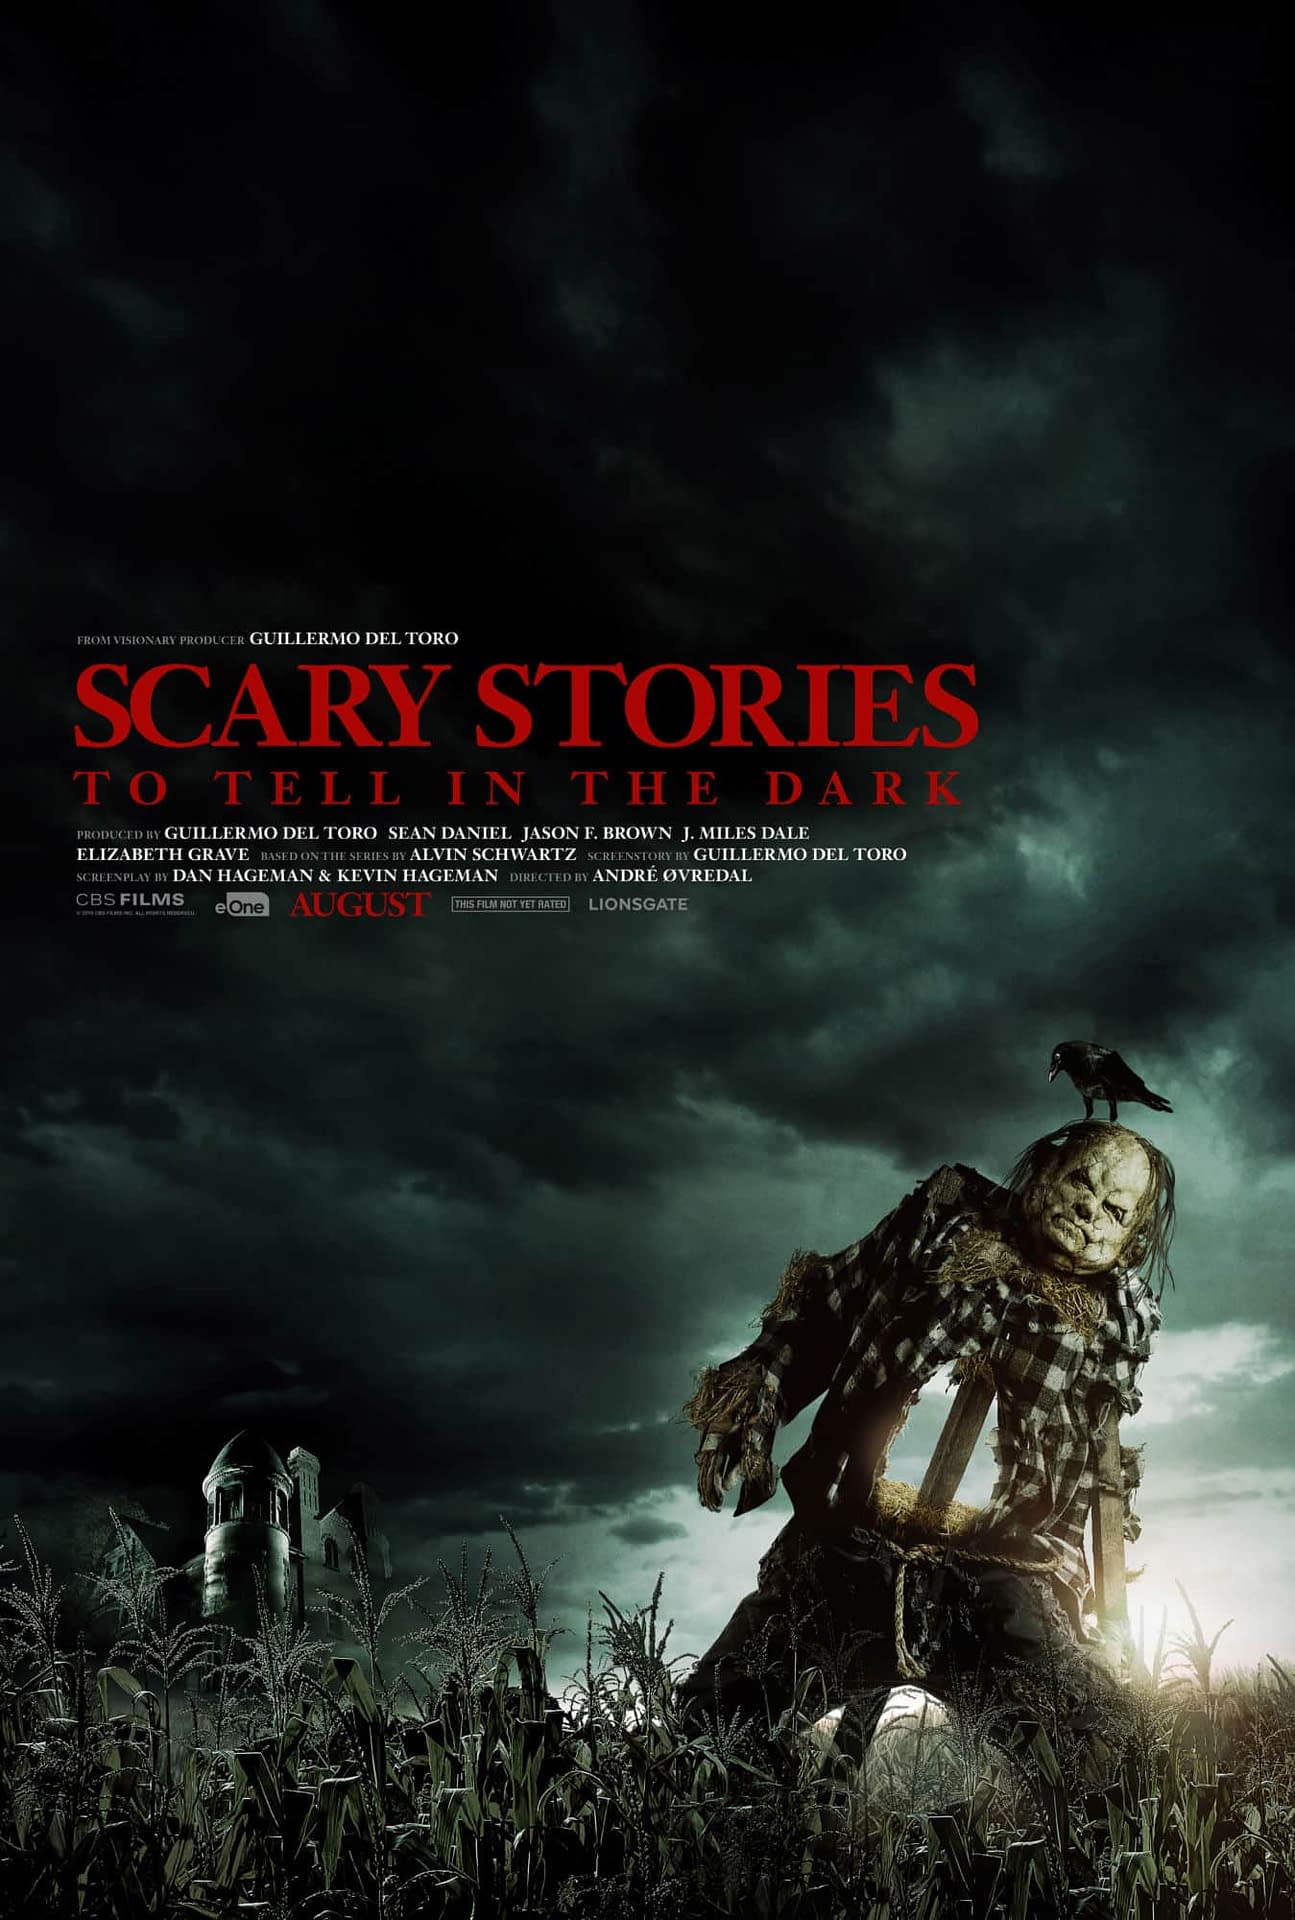 "Scary Stories" Being Told by del Toro at San Diego Comic-Con